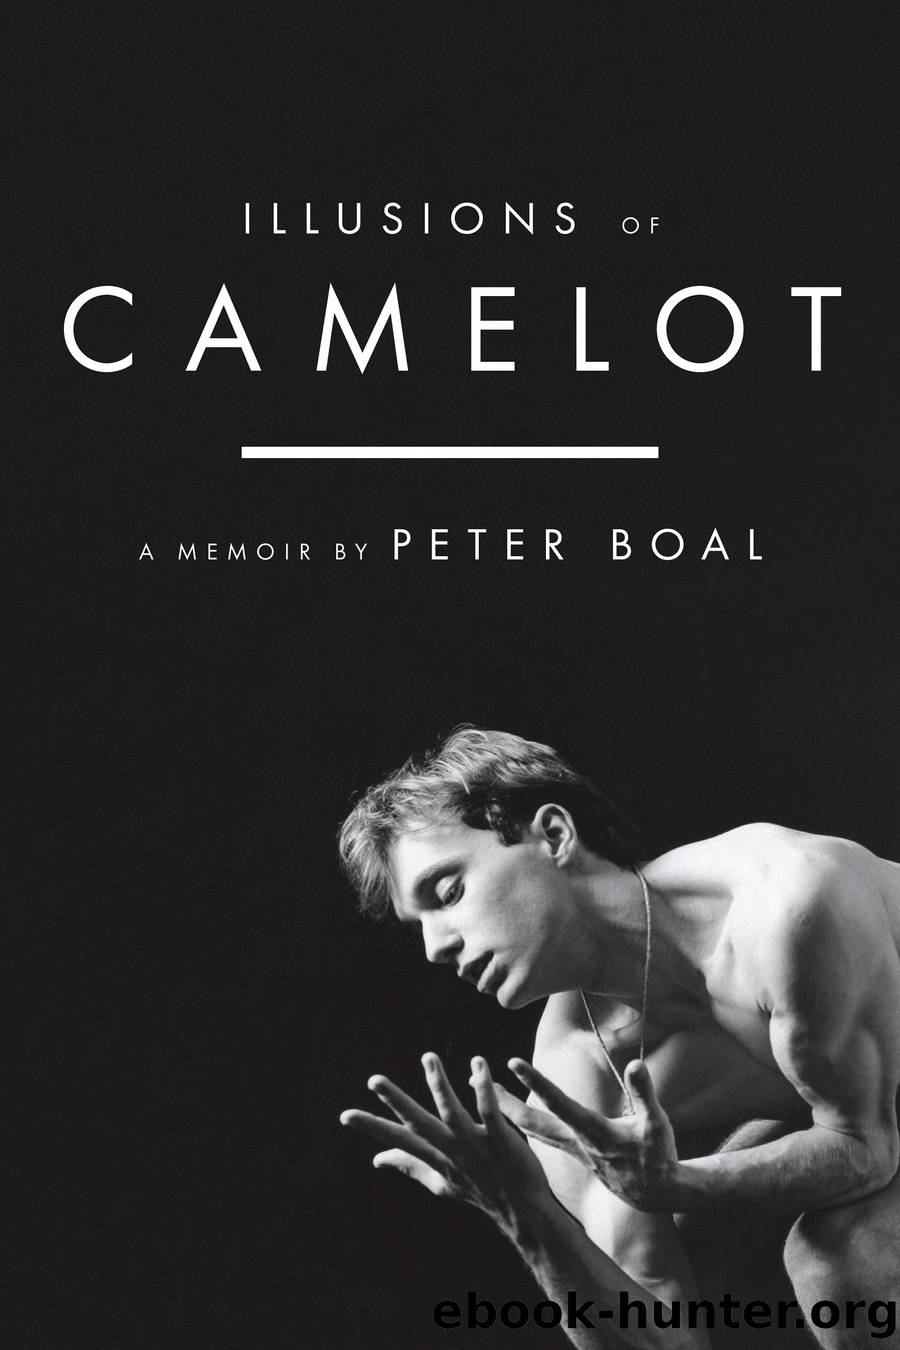 Illusions of Camelot by Peter Boal